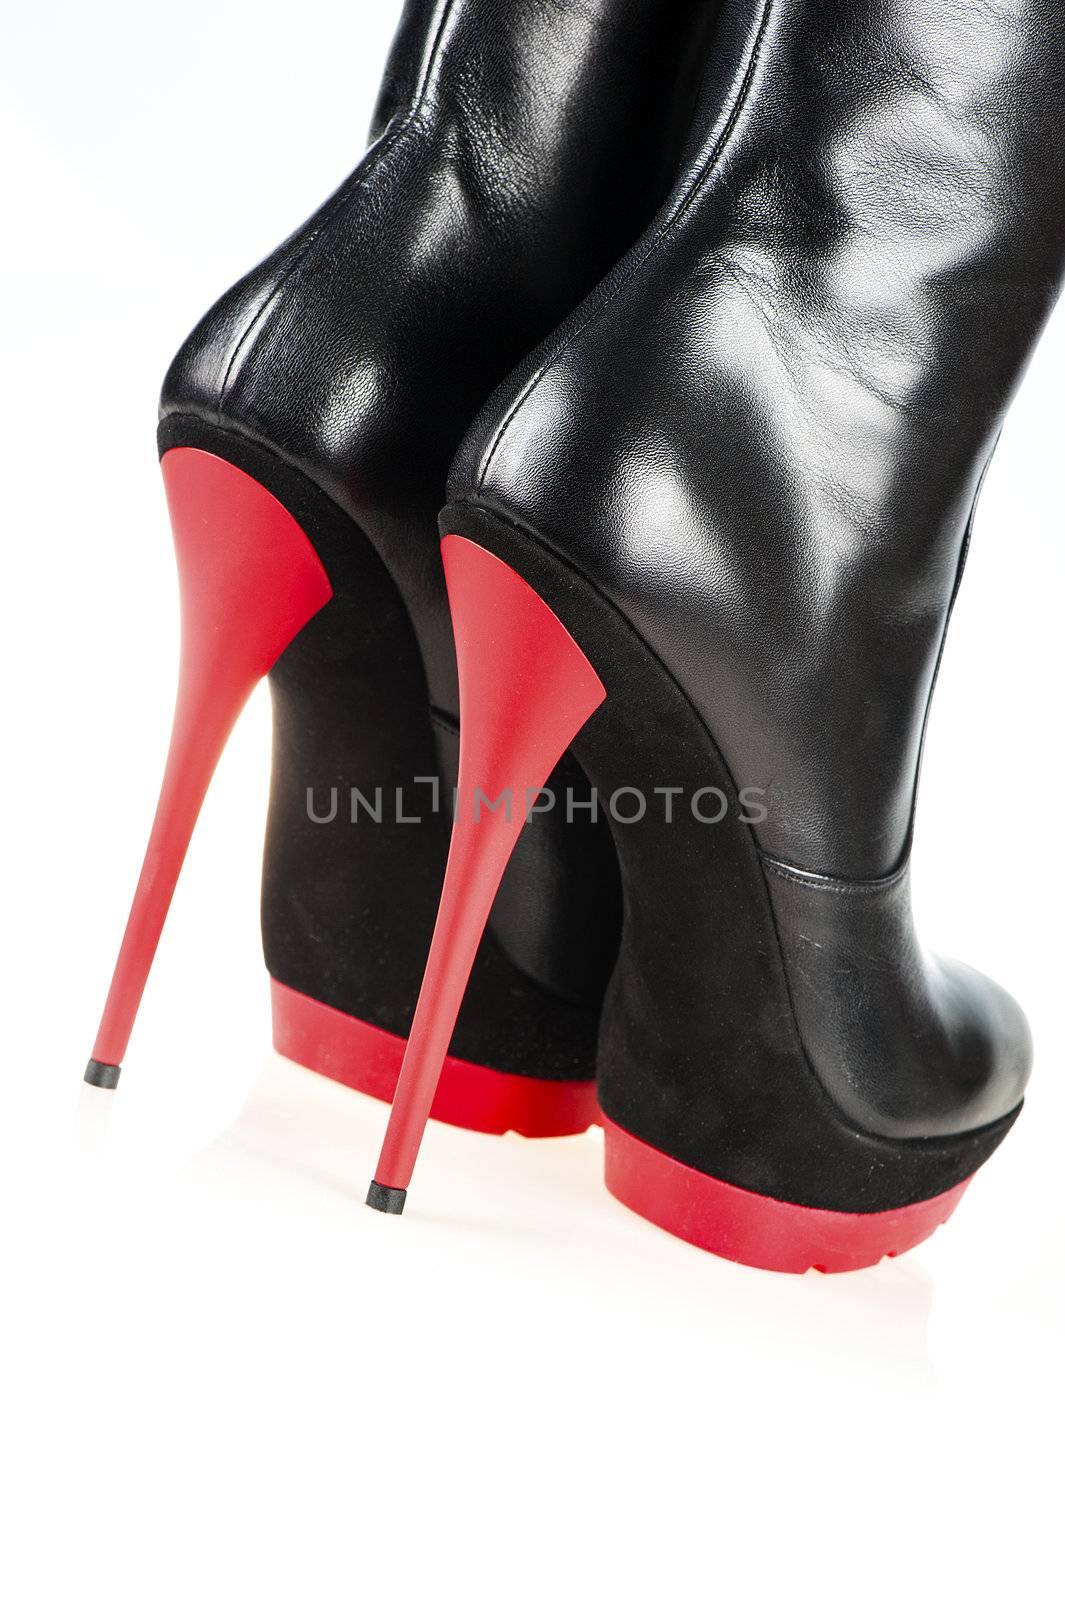 Close-up shot of a pair of fetish boots, high heels with platform, black and red color. 